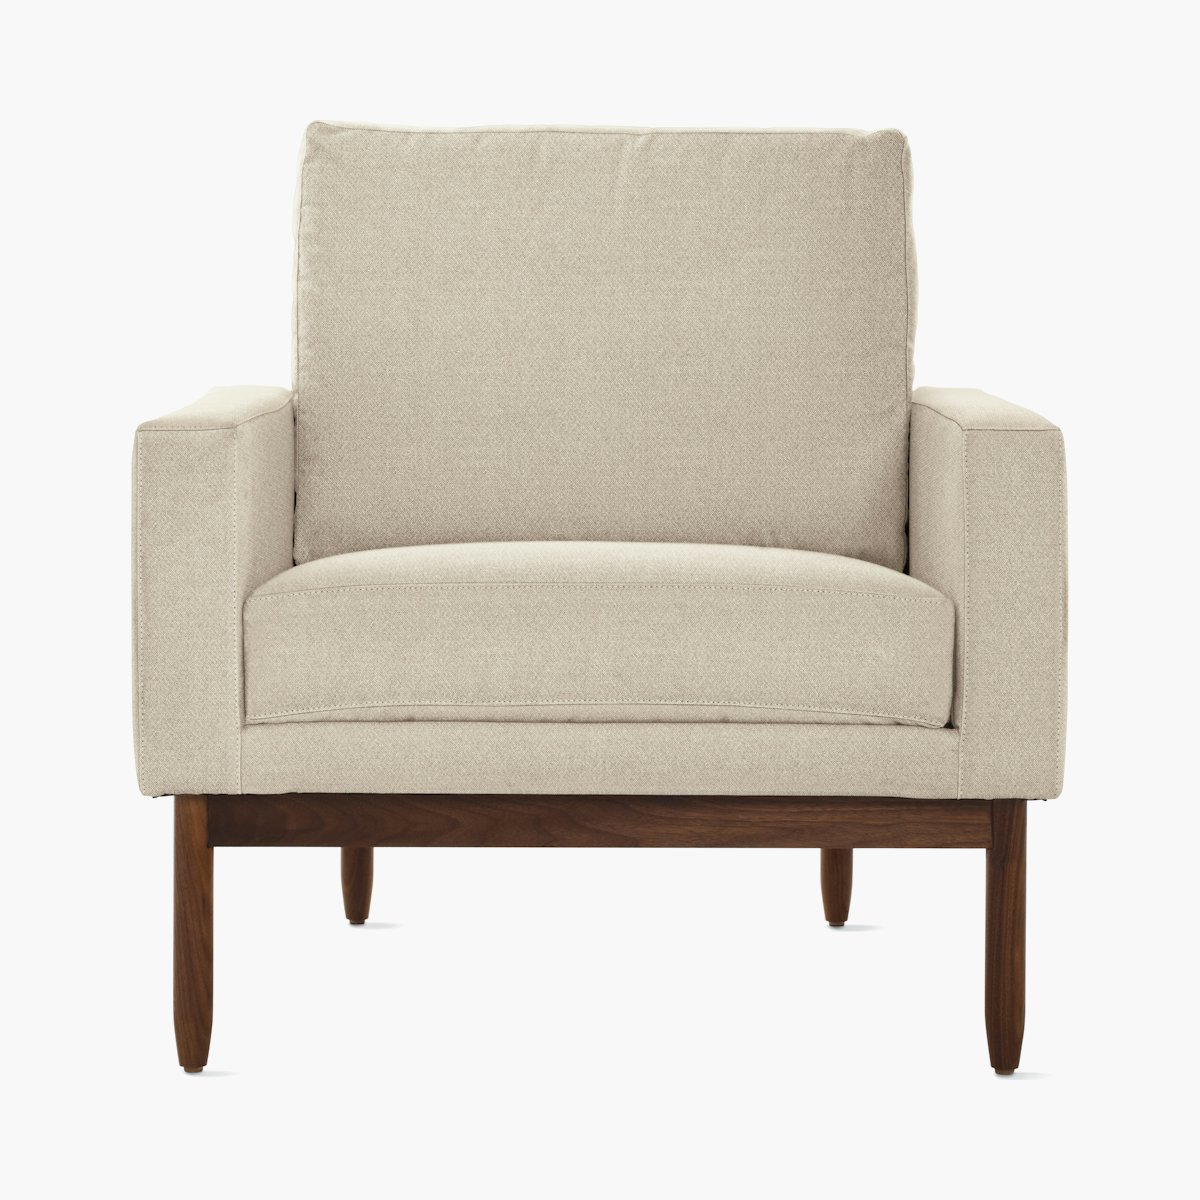 Raleigh Armchair Outlet